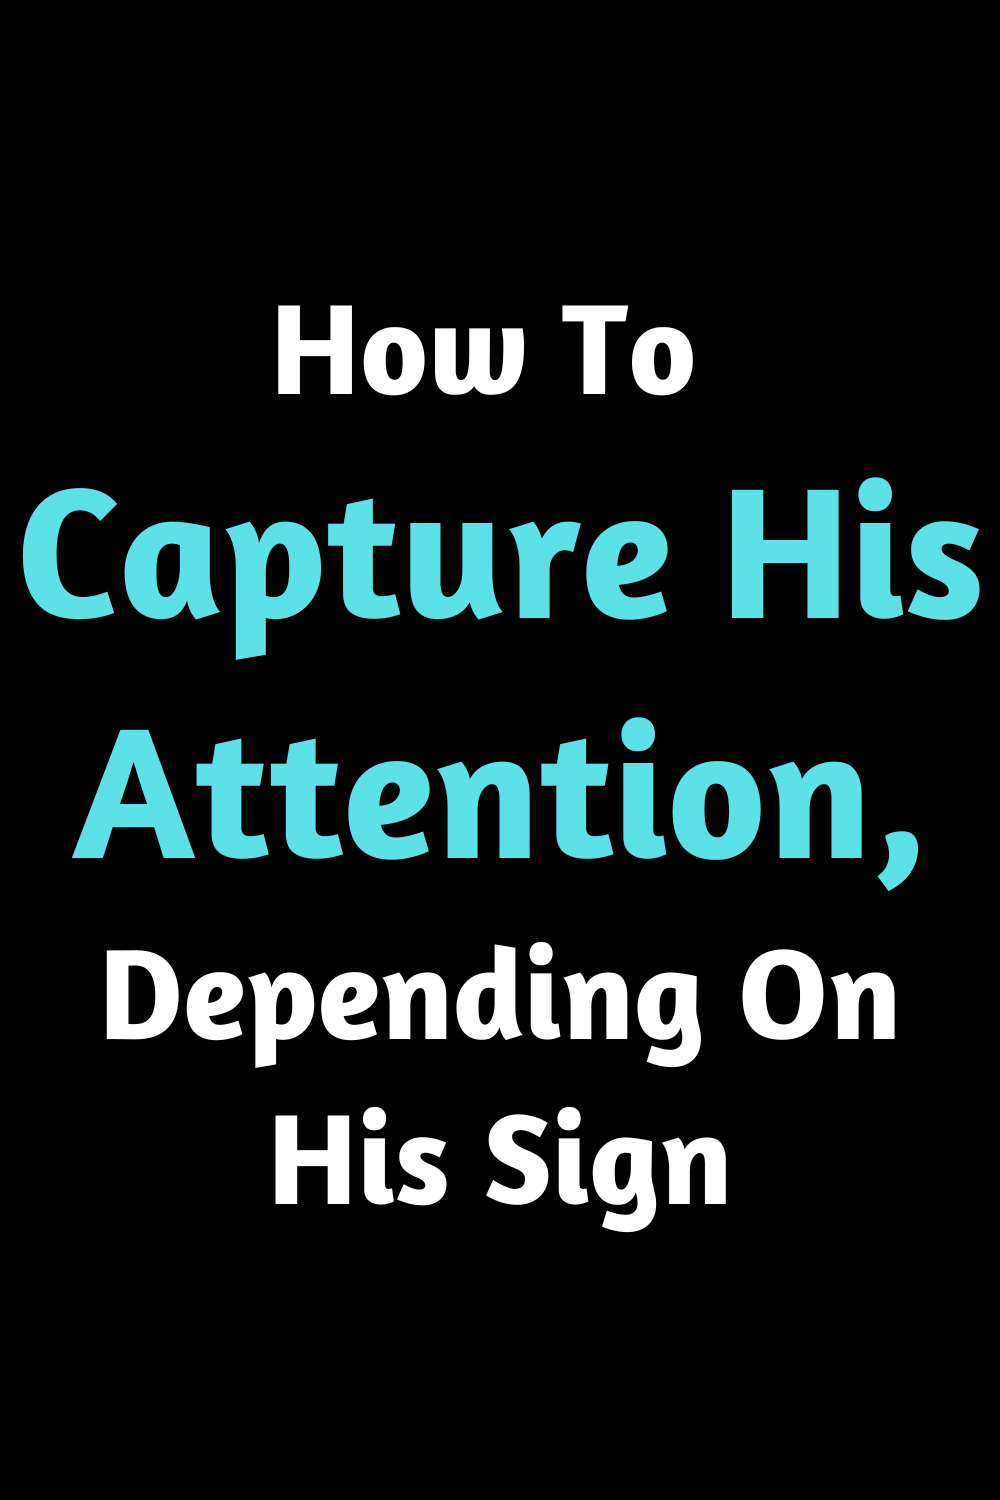 How To Capture His Attention, Depending On His Sign